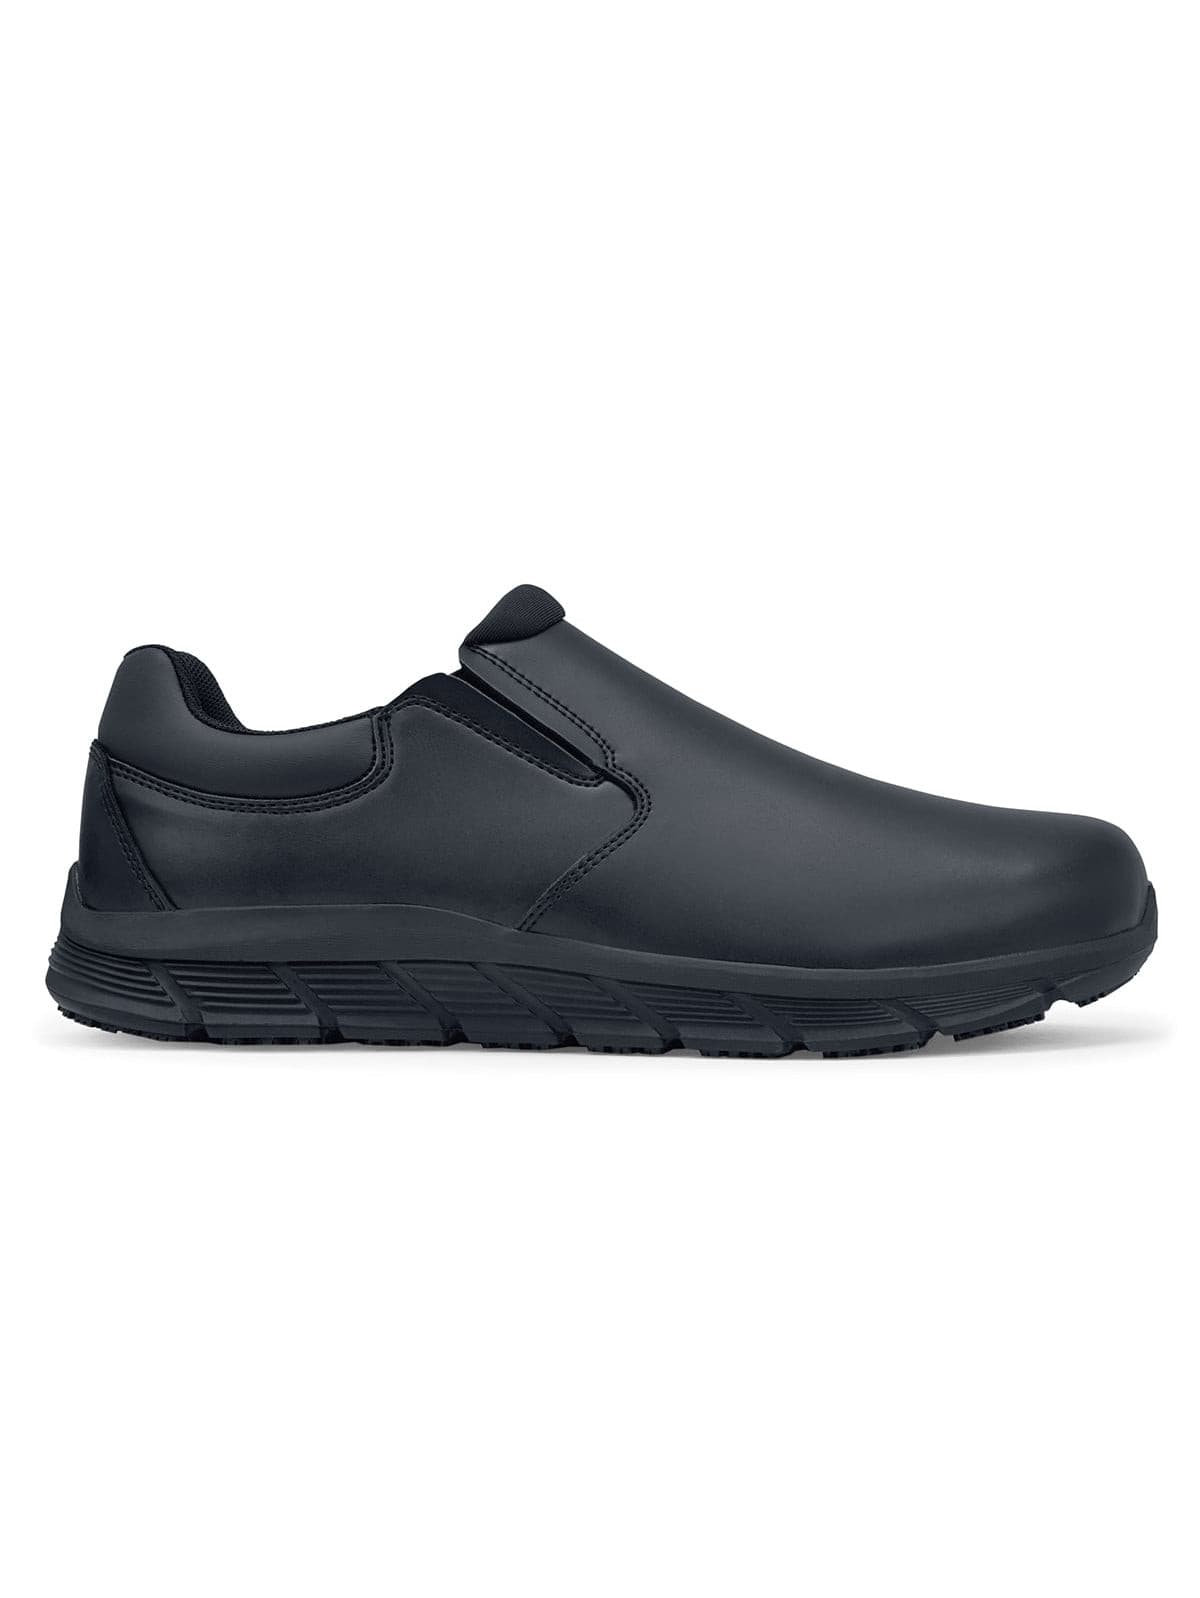 Men's Work Shoe Cater II by Shoes For Crews -  ChefsCotton